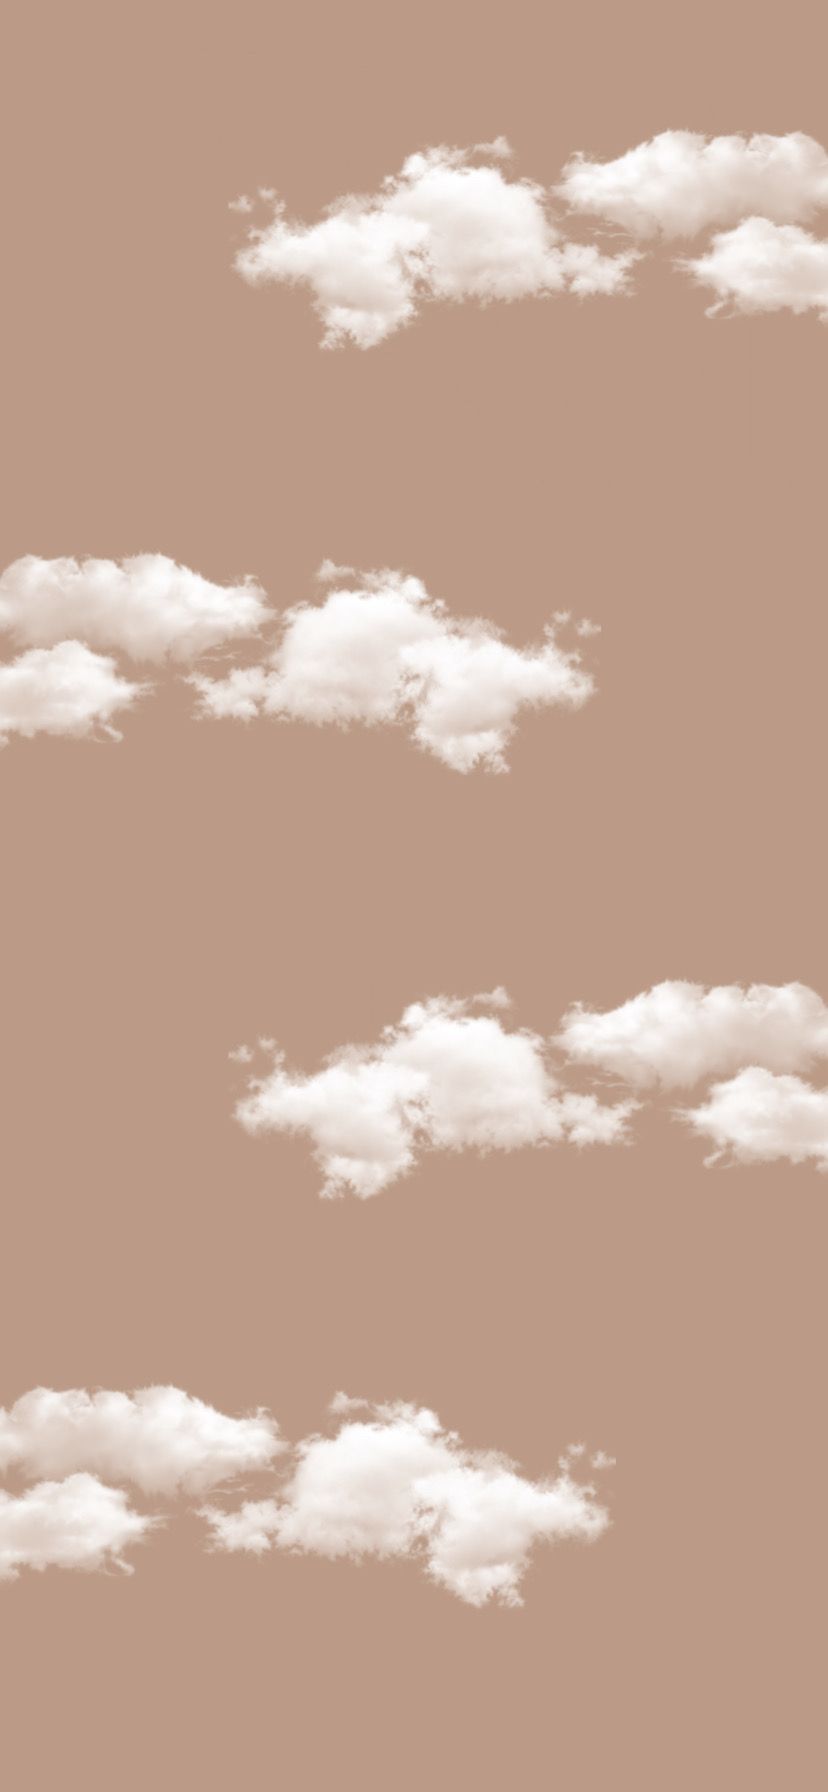 A pattern of clouds on brown background - Cream, vintage clouds, cloud, sky